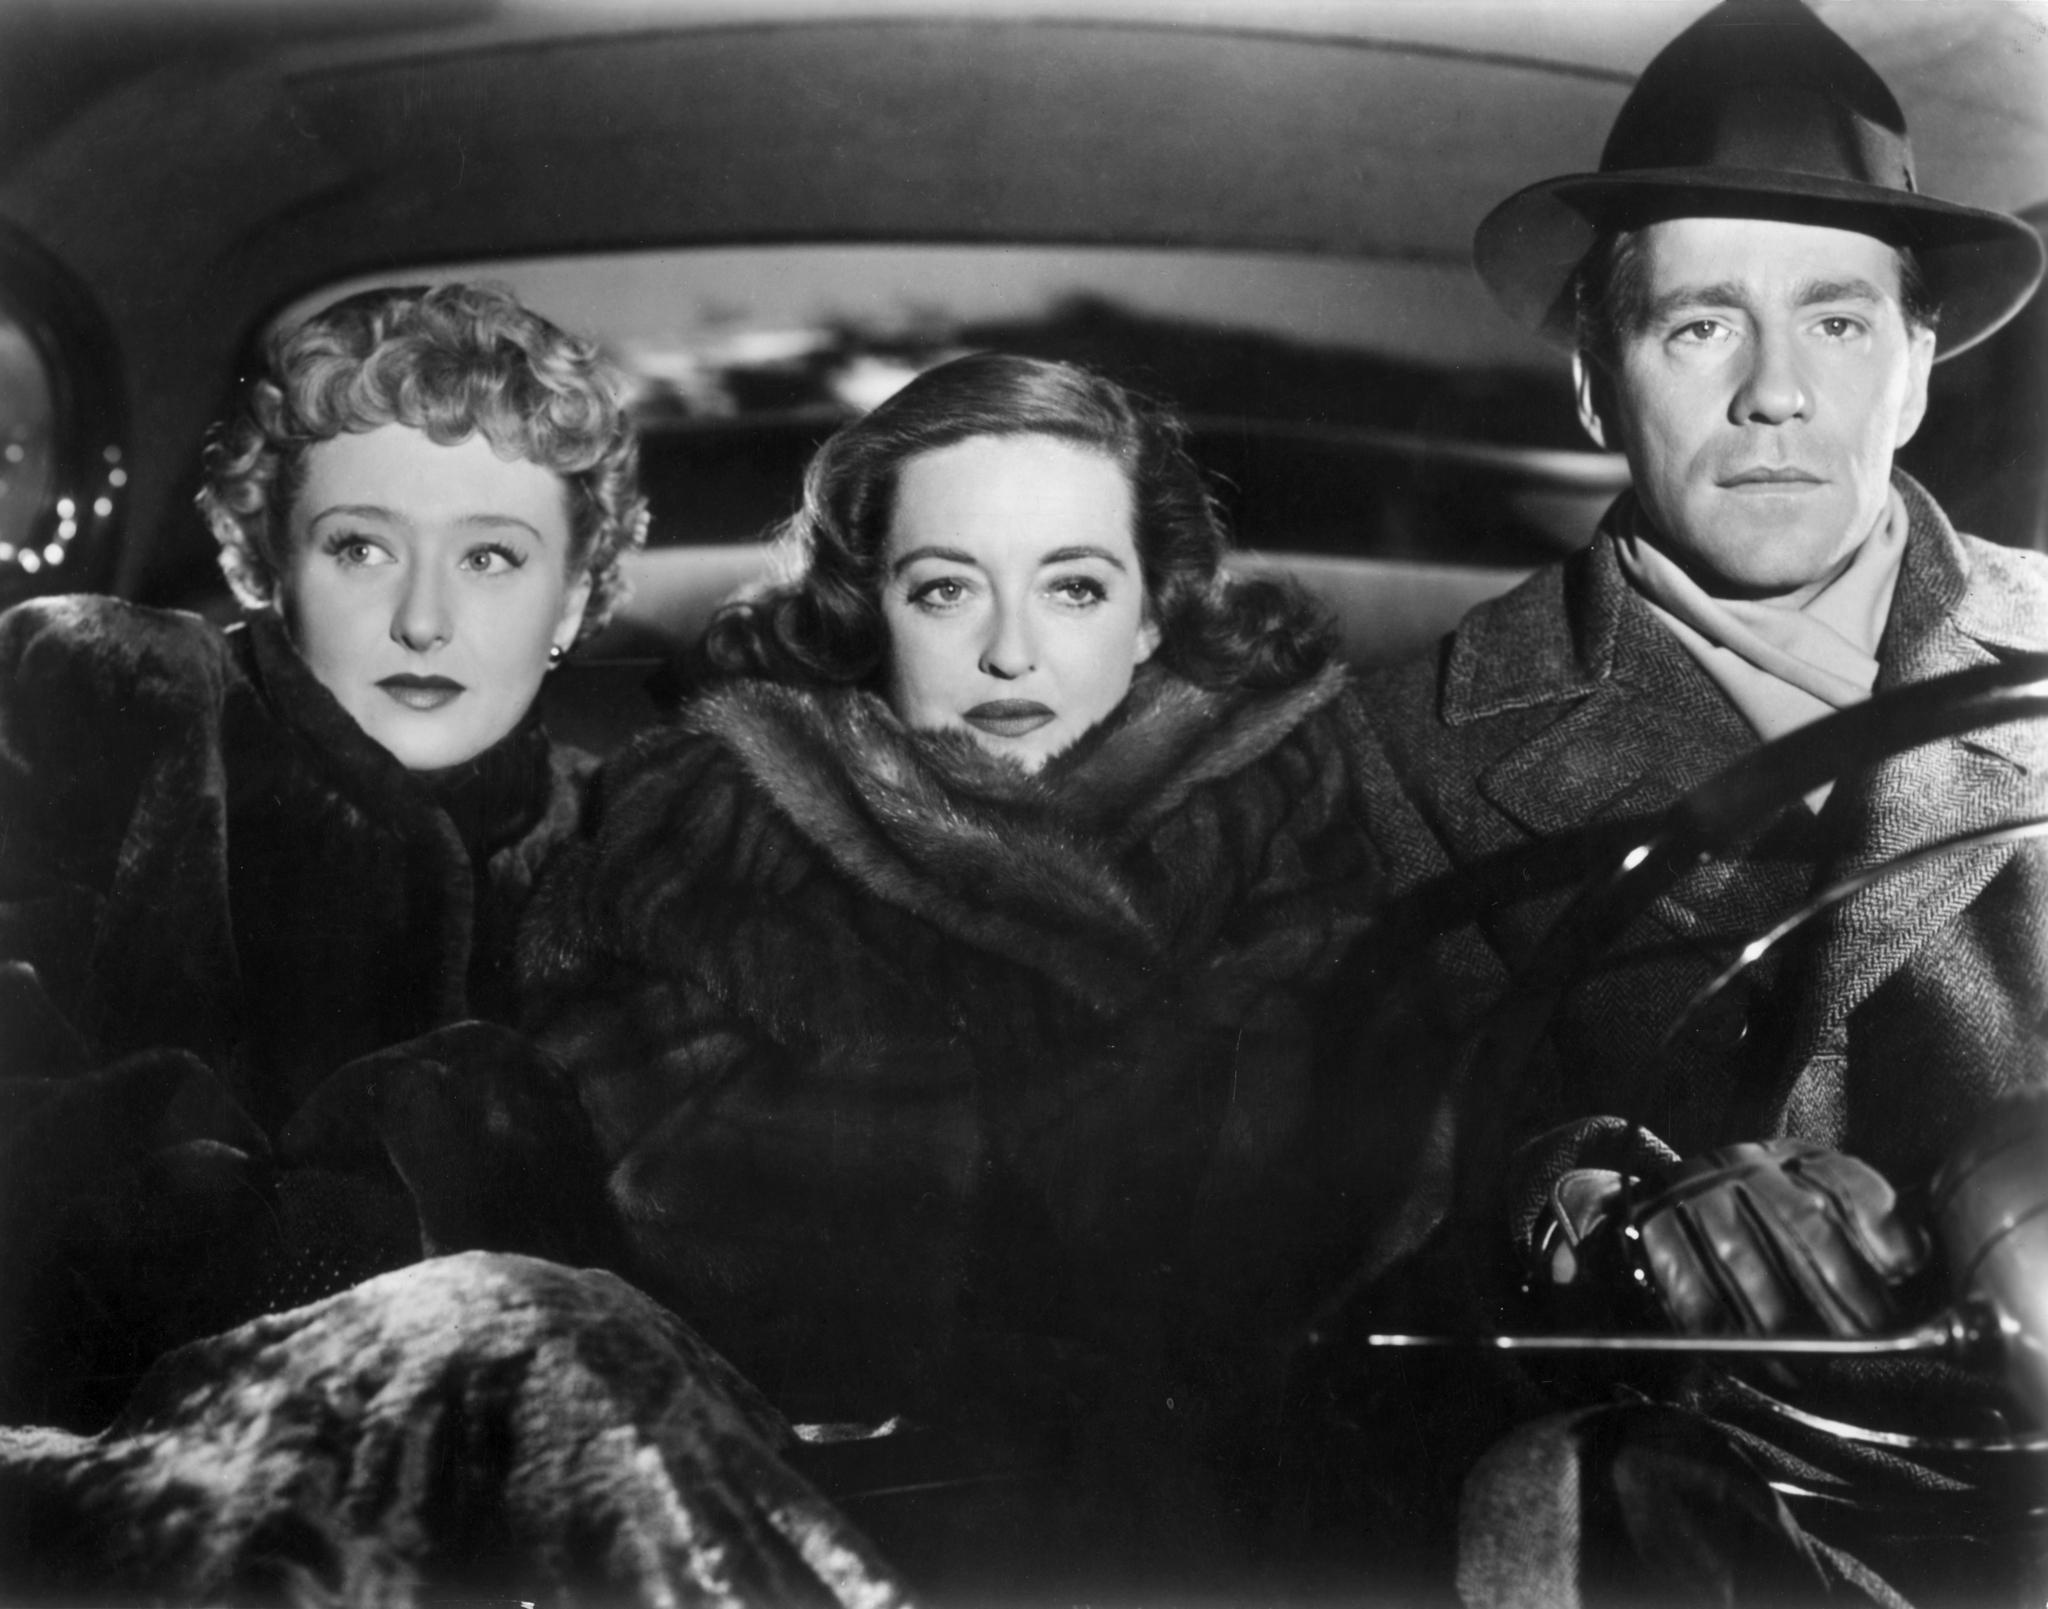 Bette Davis, Celeste Holm and Hugh Marlowe at event of All About Eve (1950)